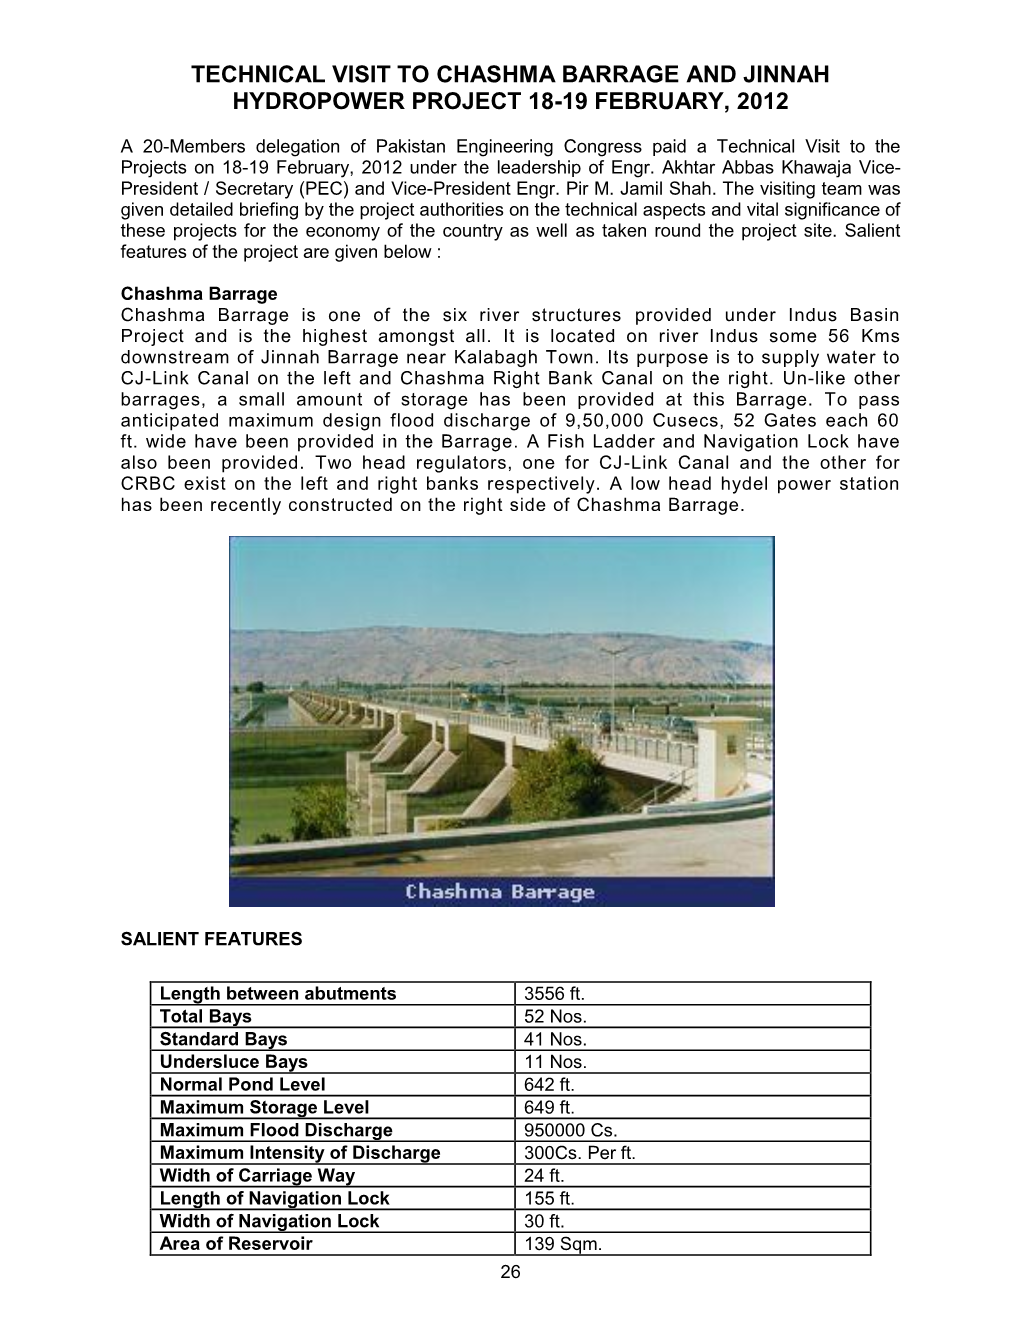 Chashma Barrage and Jinnah Hydropower Project 18-19 February, 2012